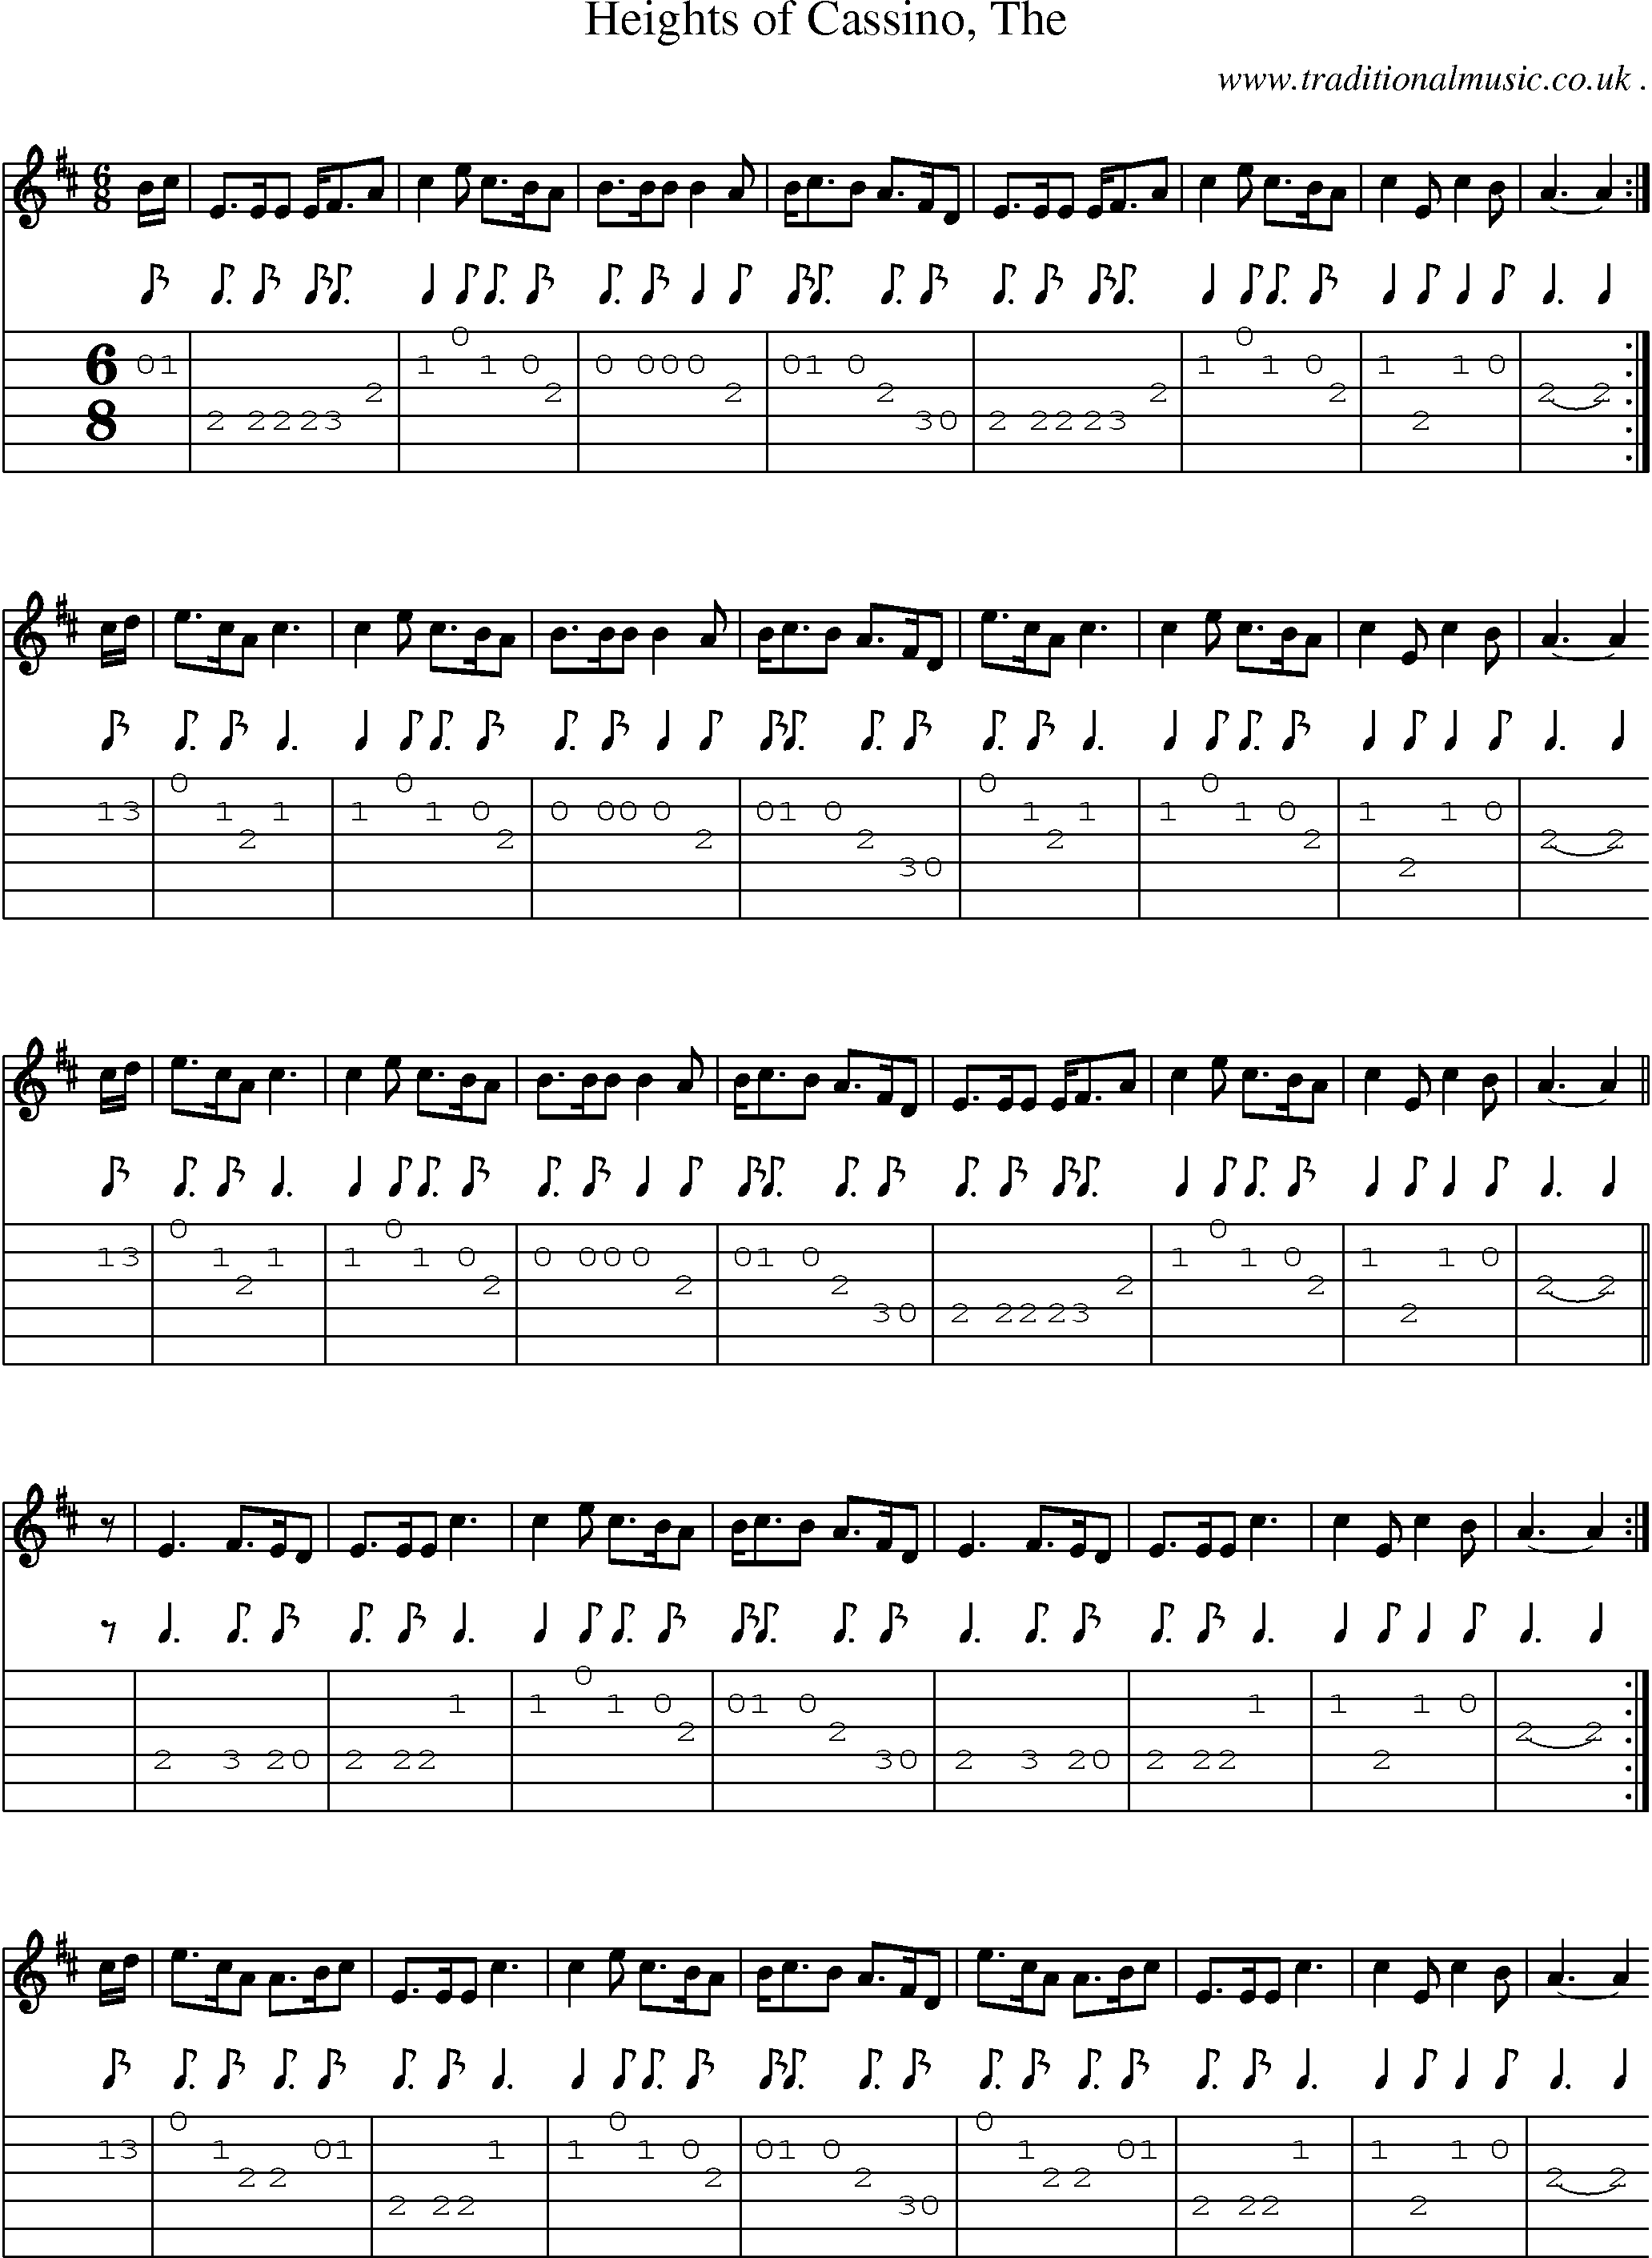 Sheet-music  score, Chords and Guitar Tabs for Heights Of Cassino The